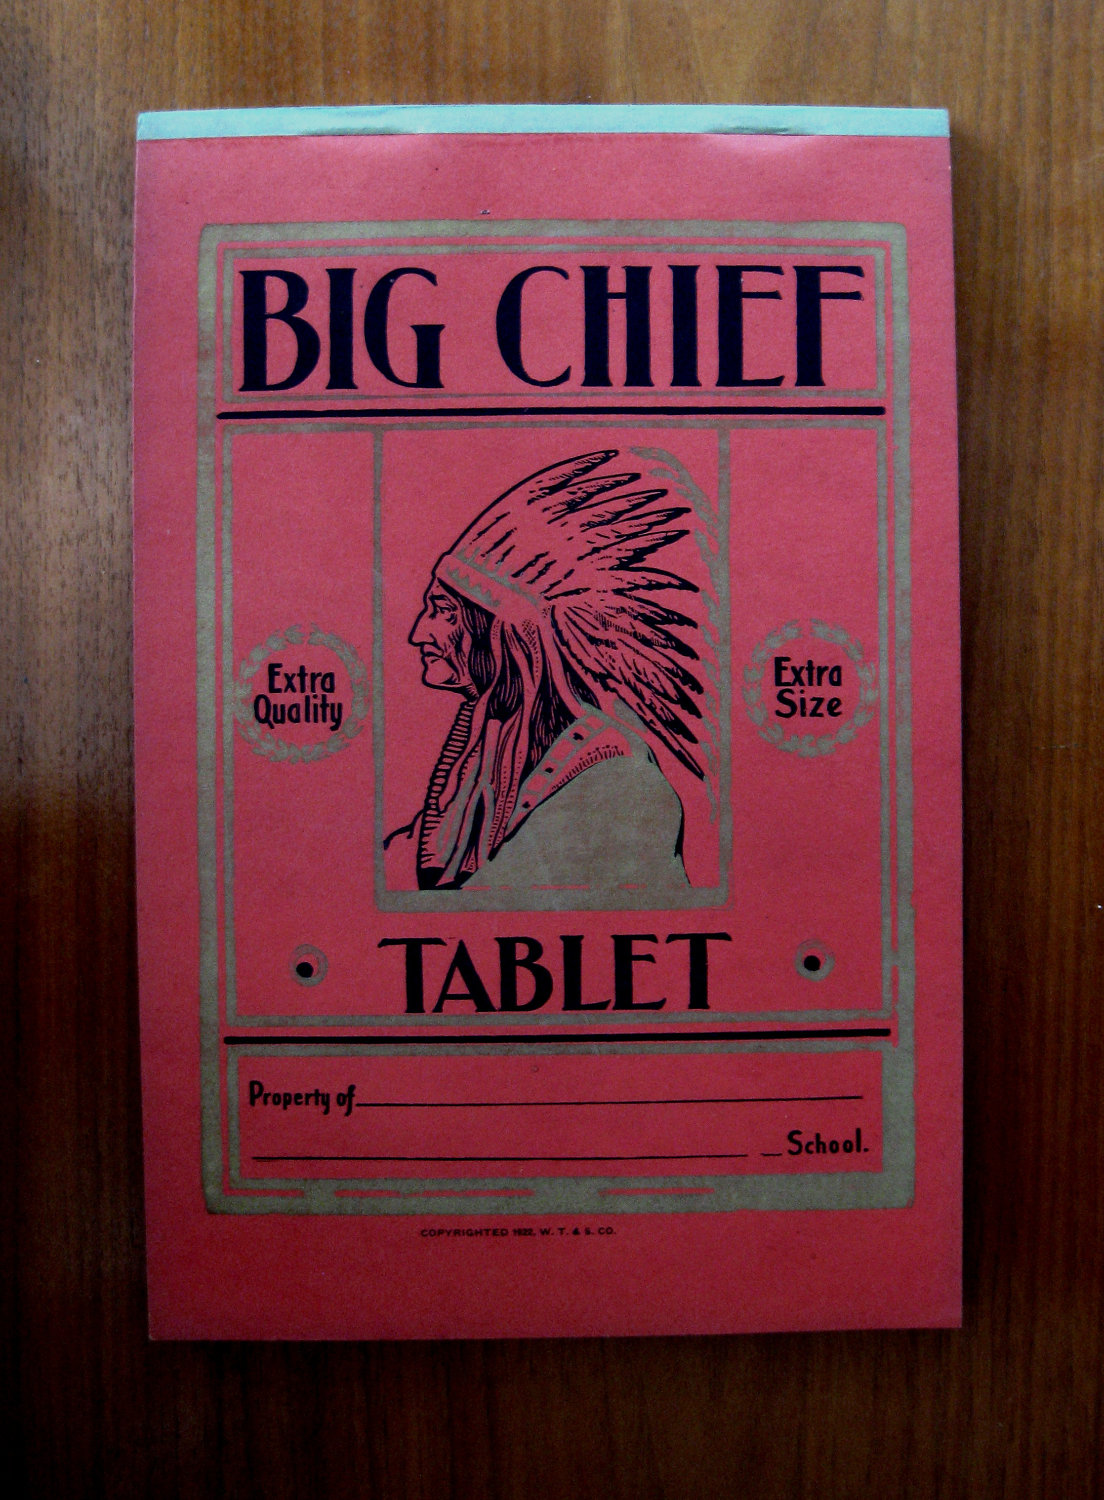 The Big Chief Tablet – I Remember JFK: A Baby Boomer's Pleasant